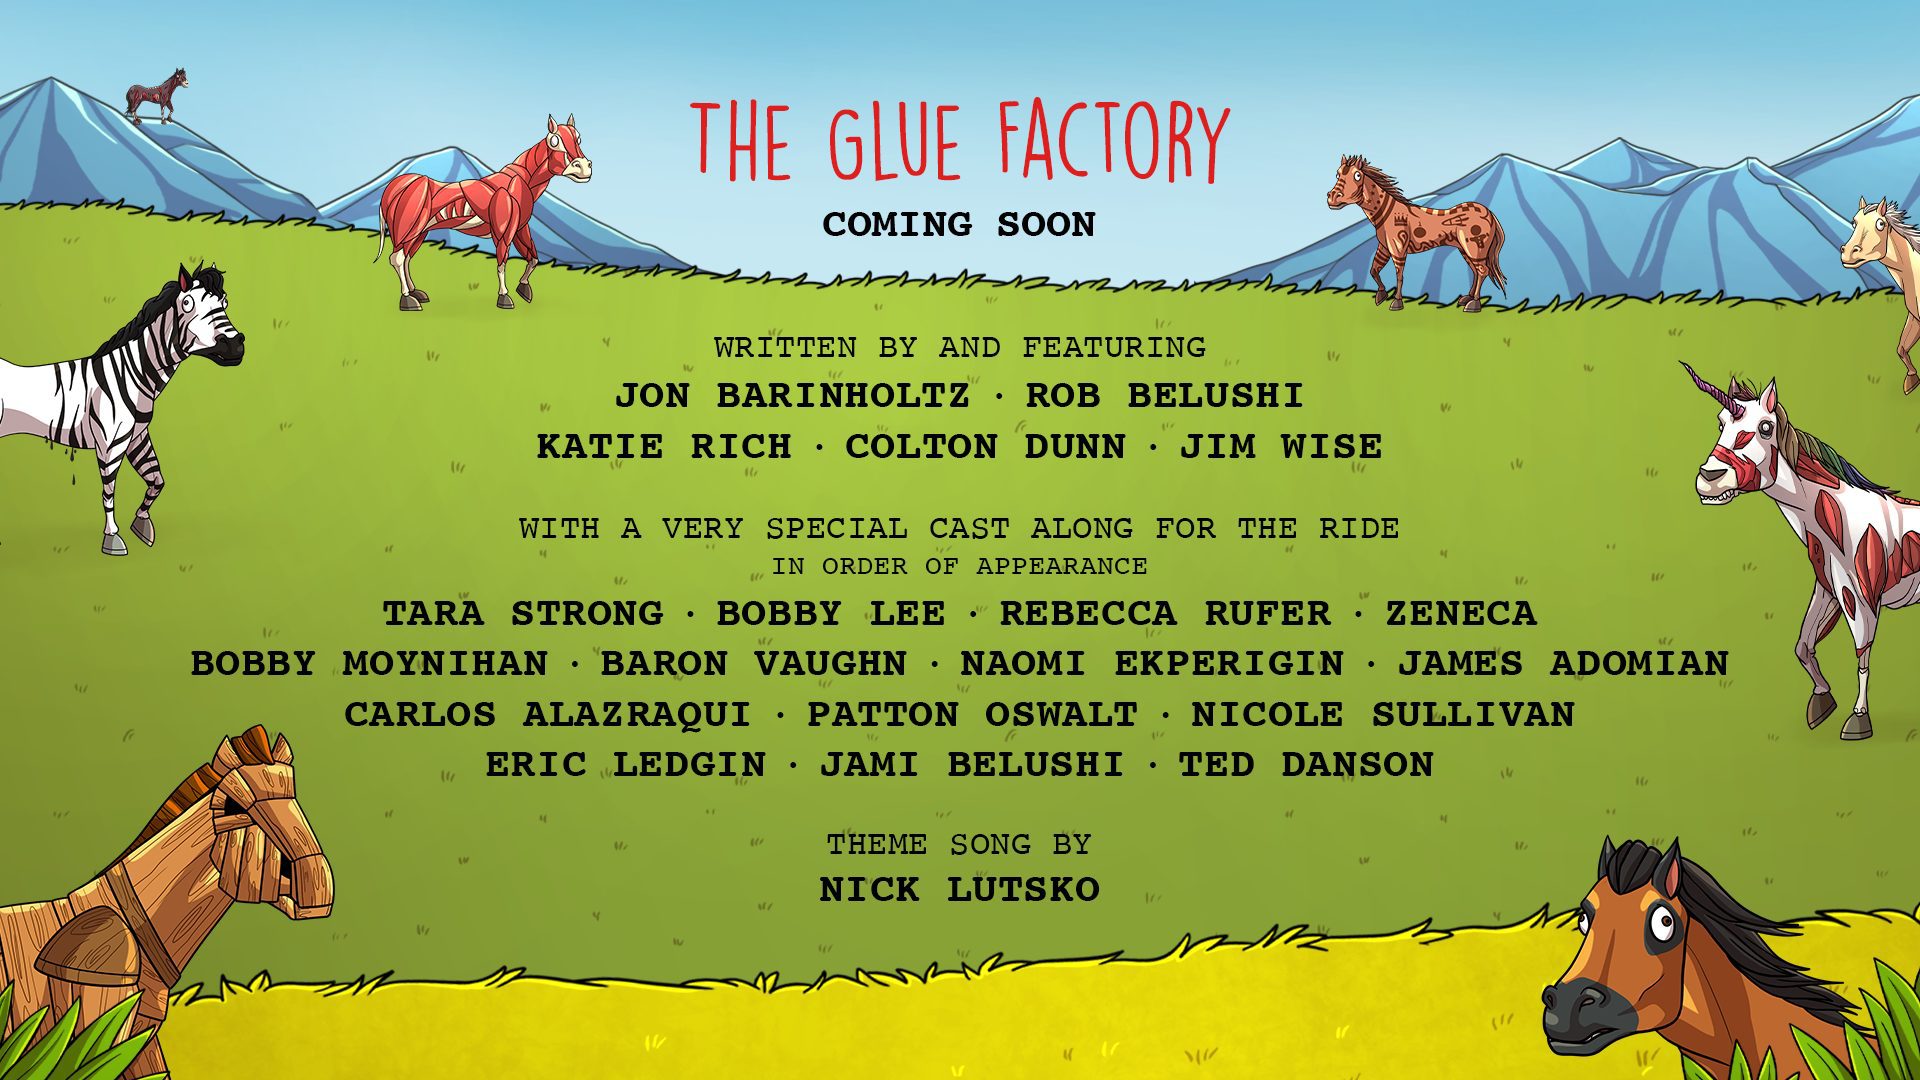 The Glue Factory NFT Project Turning into a TV Show